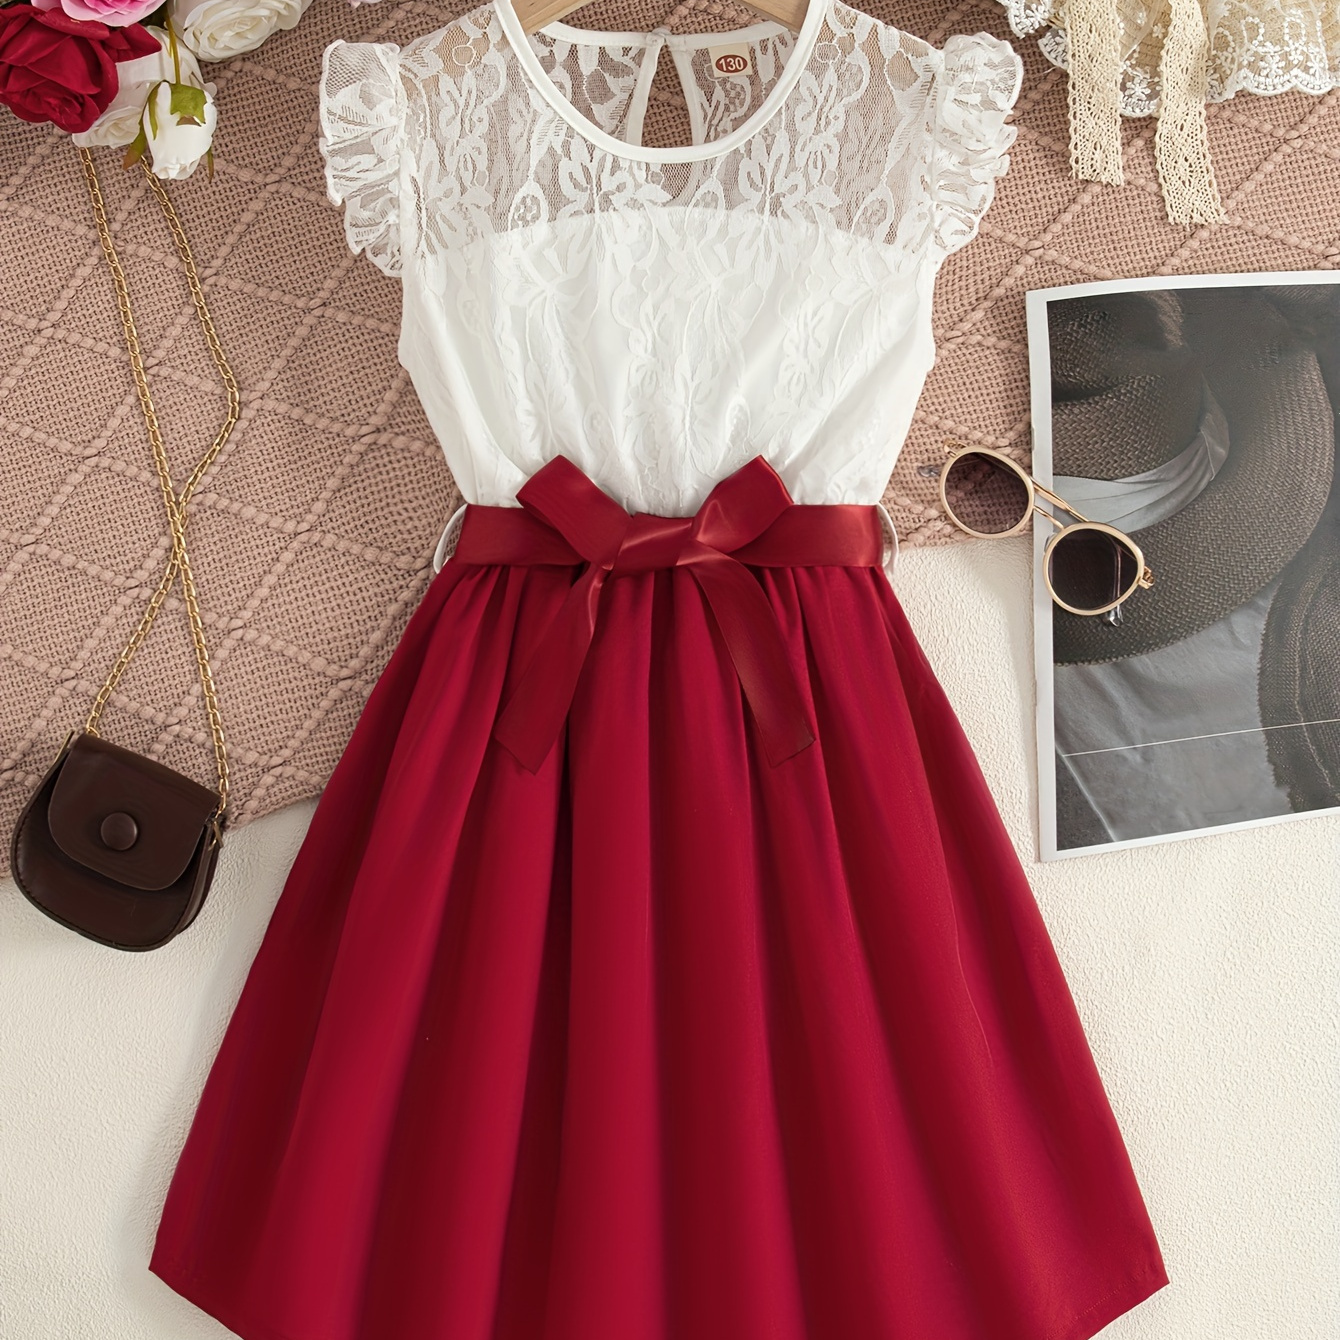 

Elegant Girls Splicing Bow Belted Lace Decor Sleeveless Dress Summer Party Gift Beach Vacation